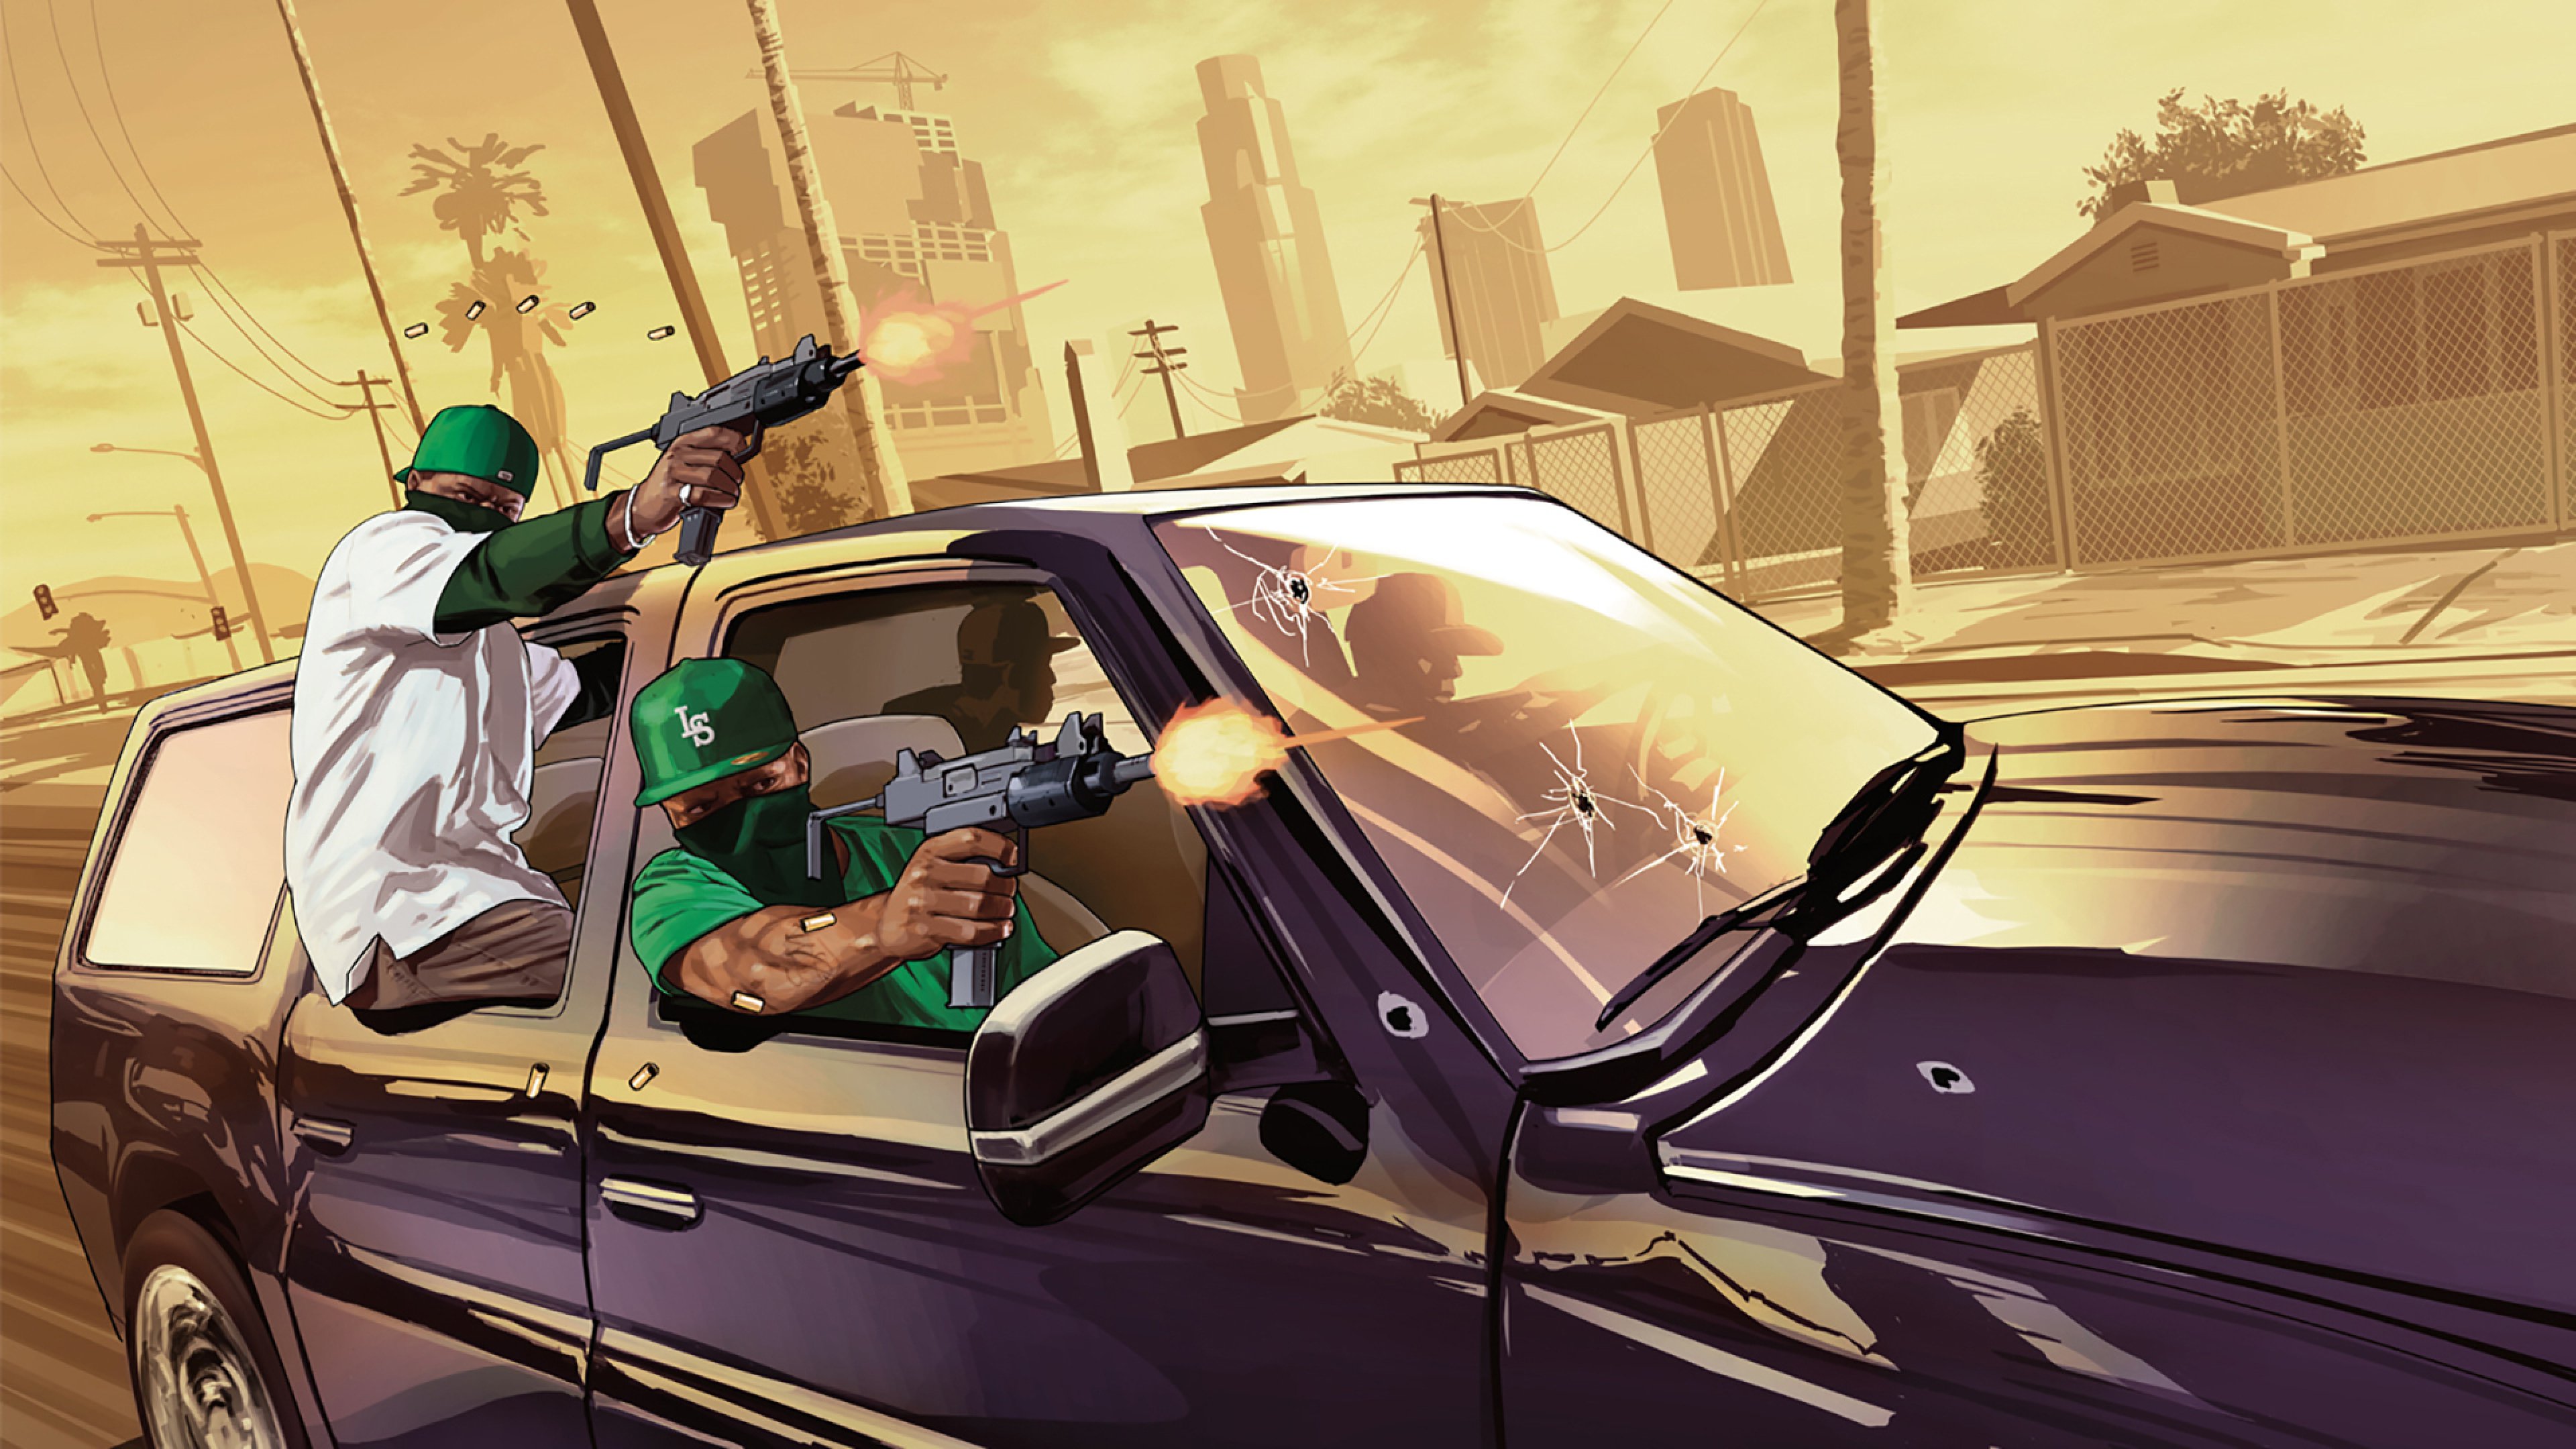 GTA 6 looks set to bring back a controversial franchise feature